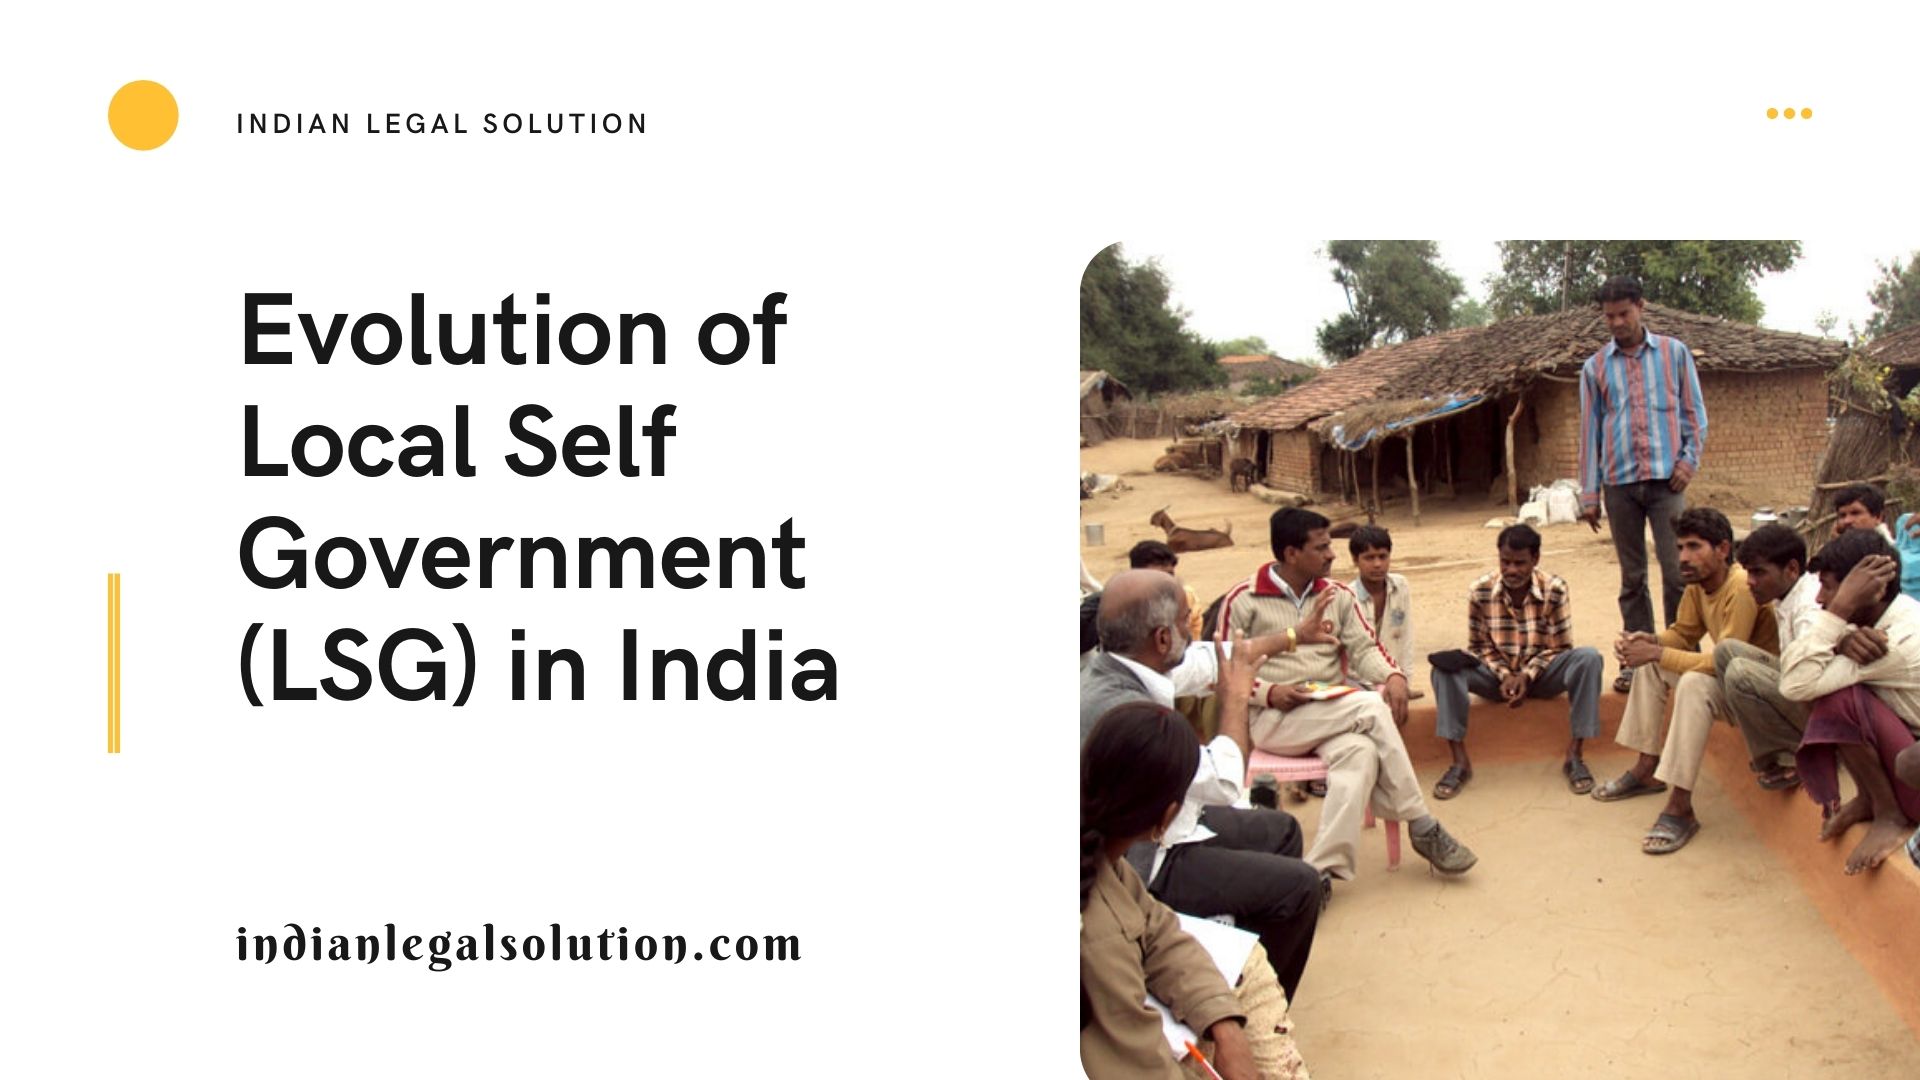 essay on local self government in india